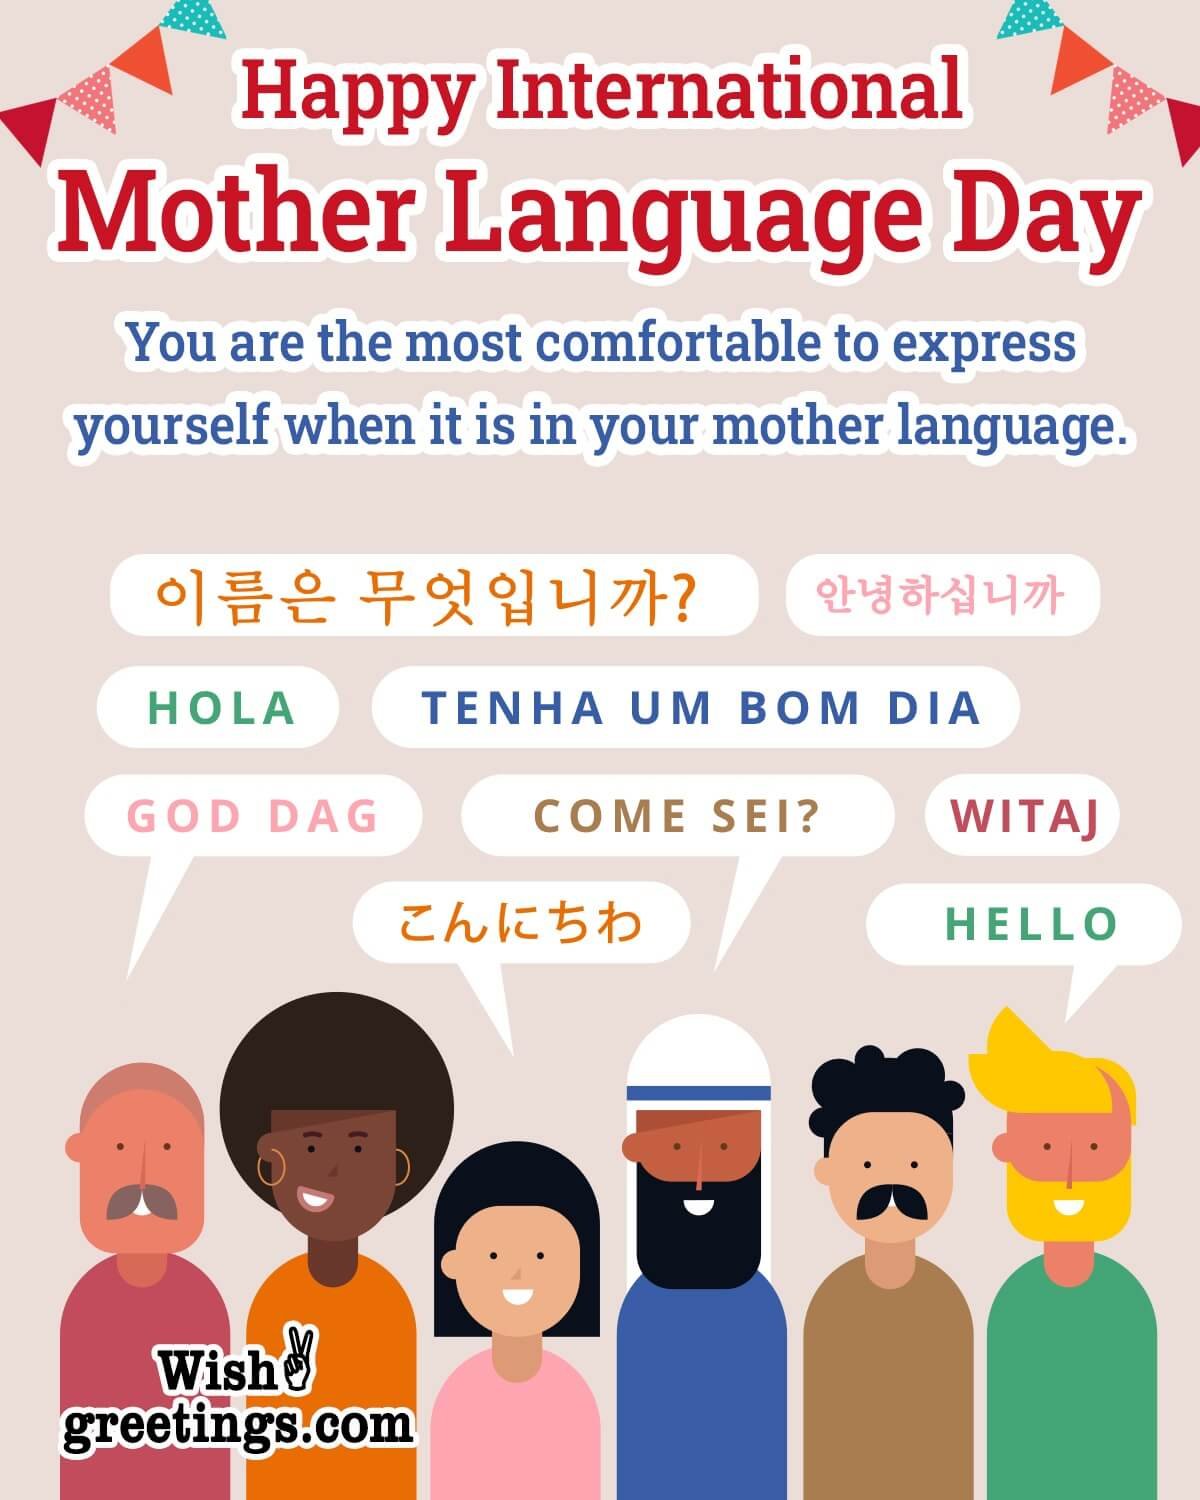 Happy International Mother Language Day Message